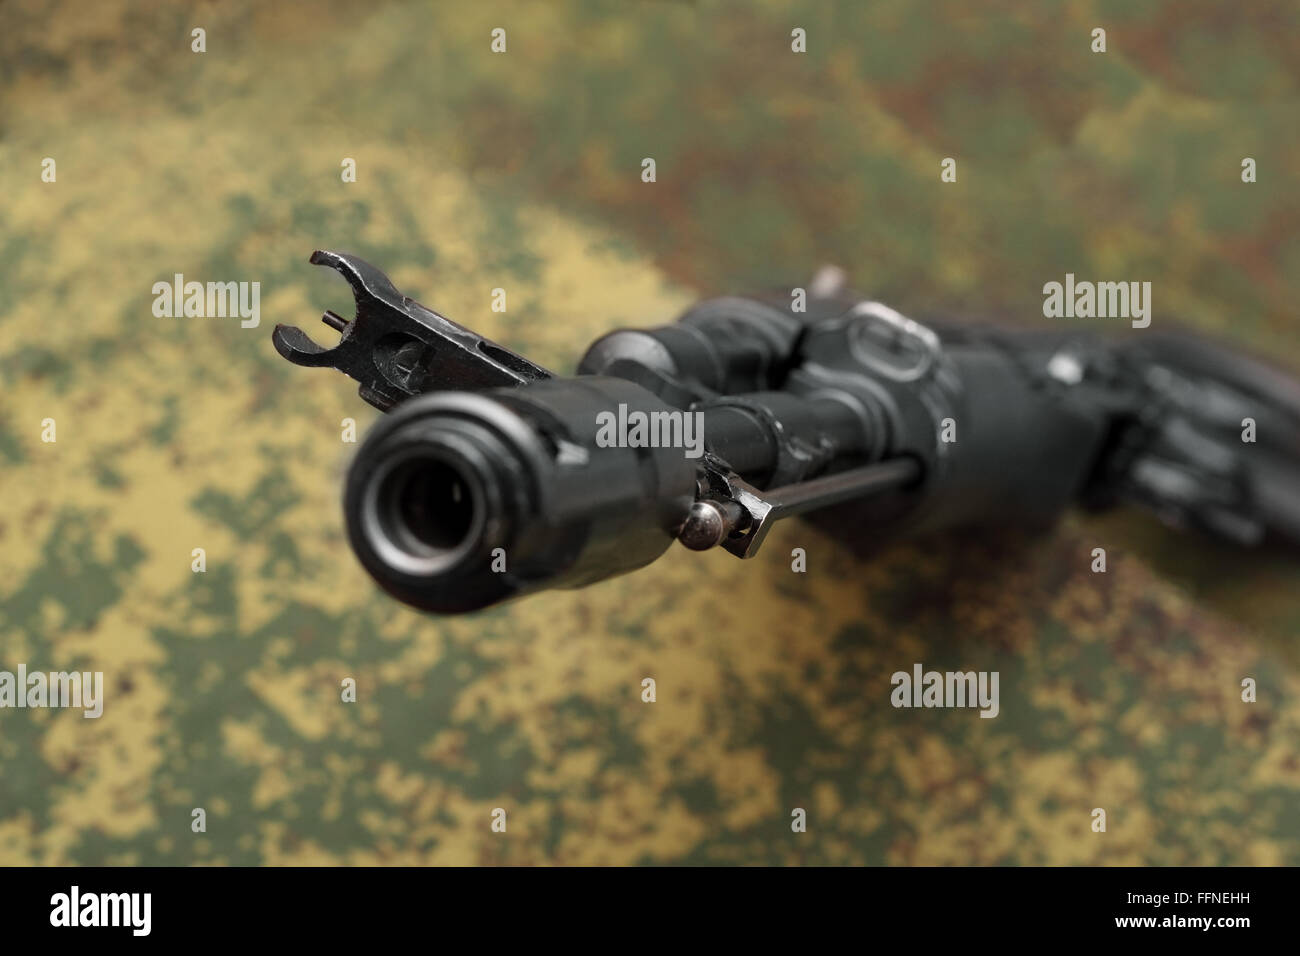 Assault rifle view from muzzle brake focus on front sight on camouflage background Stock Photo